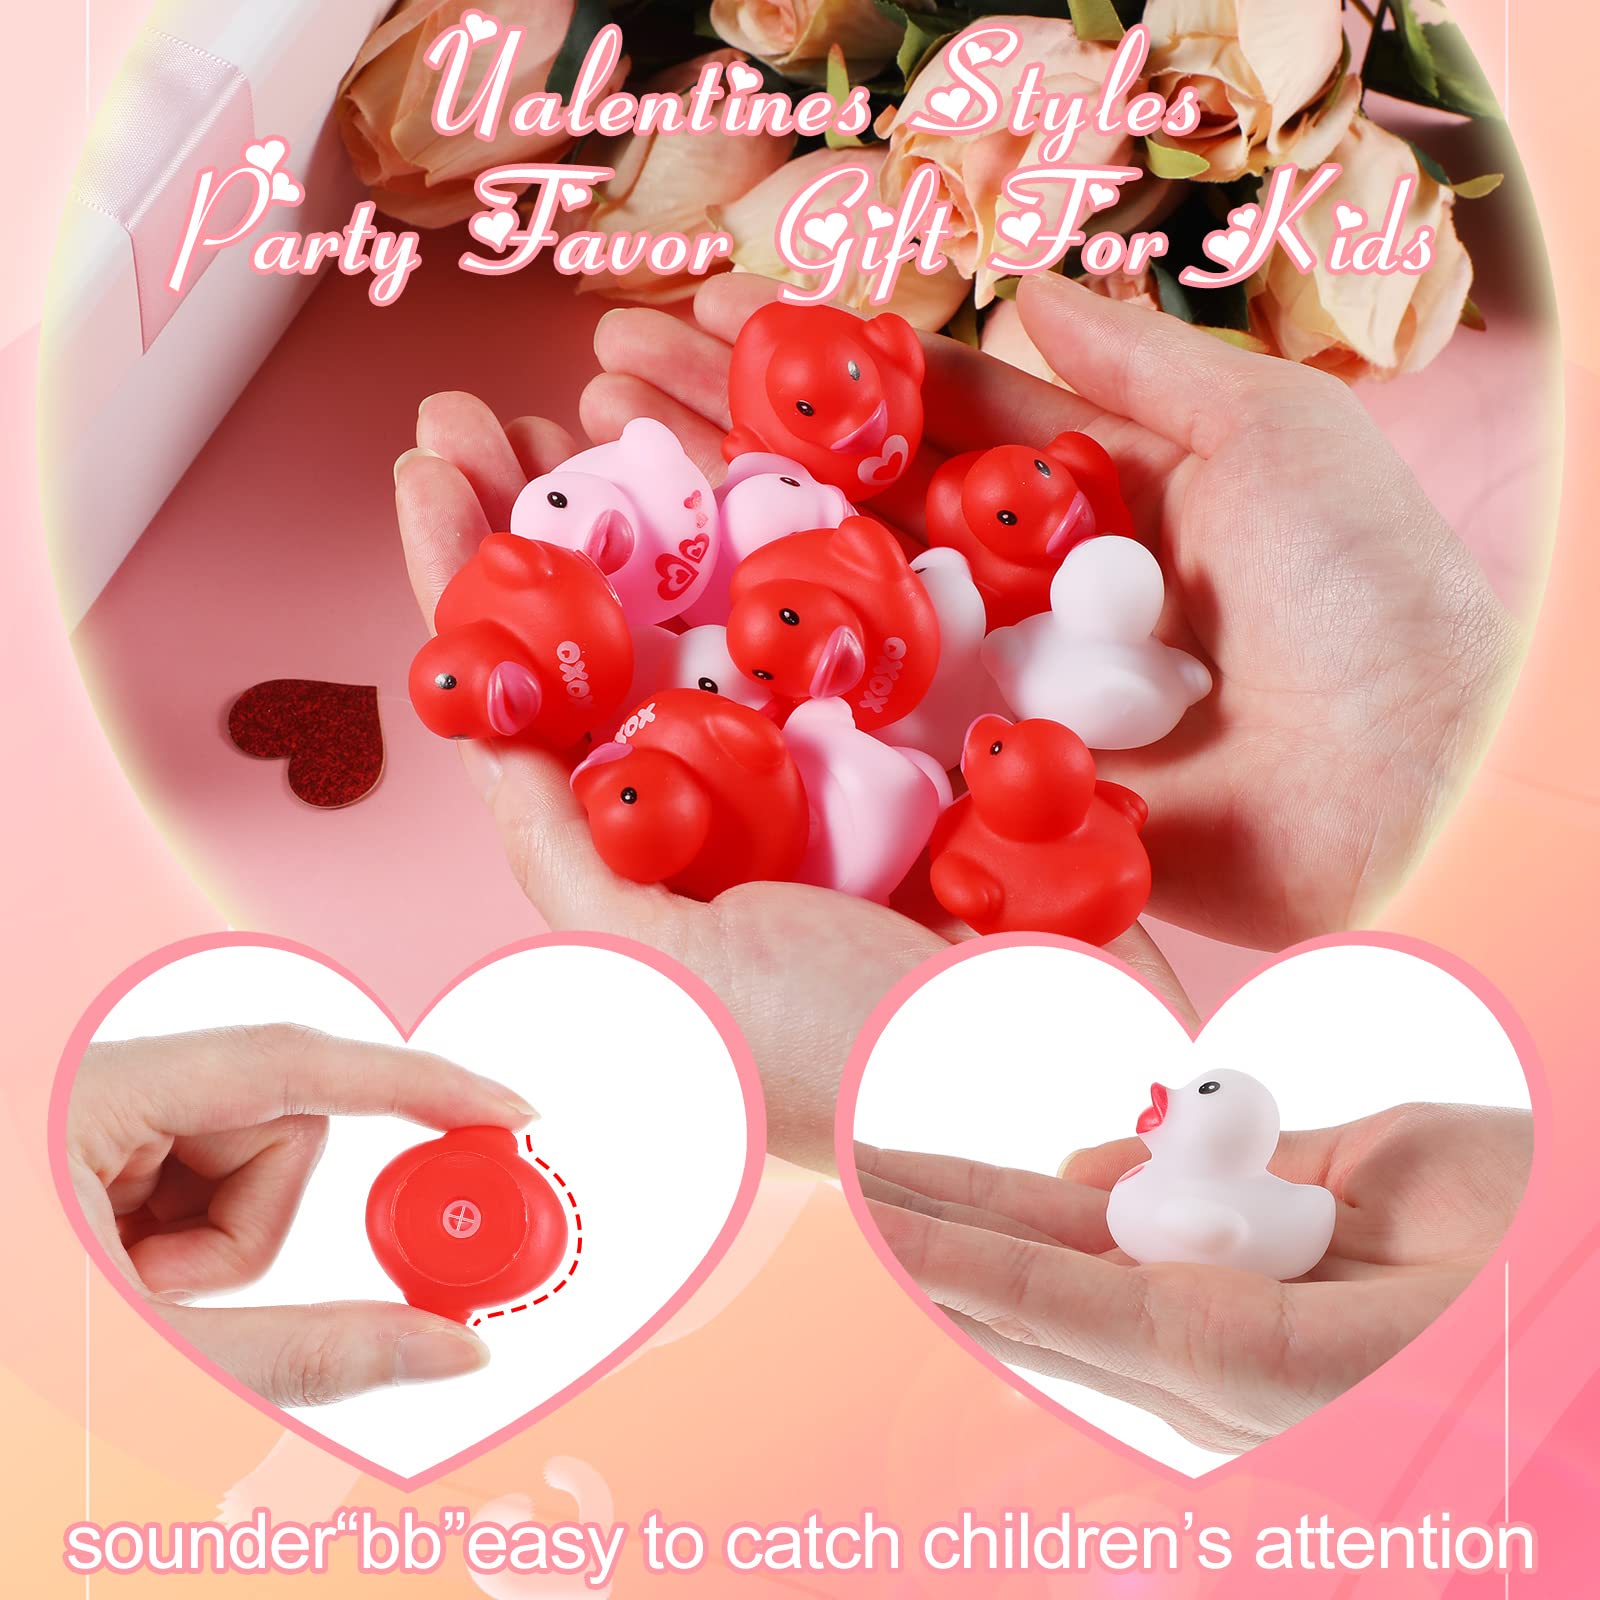 Jerify 100 Pcs Valentine's Day Rubber Ducks Mini Heart Rubber Ducks Christmas Ducks Bathtub Pool Toys for Valentines Party Favors Birthday Goodie Bag Fillers Gift